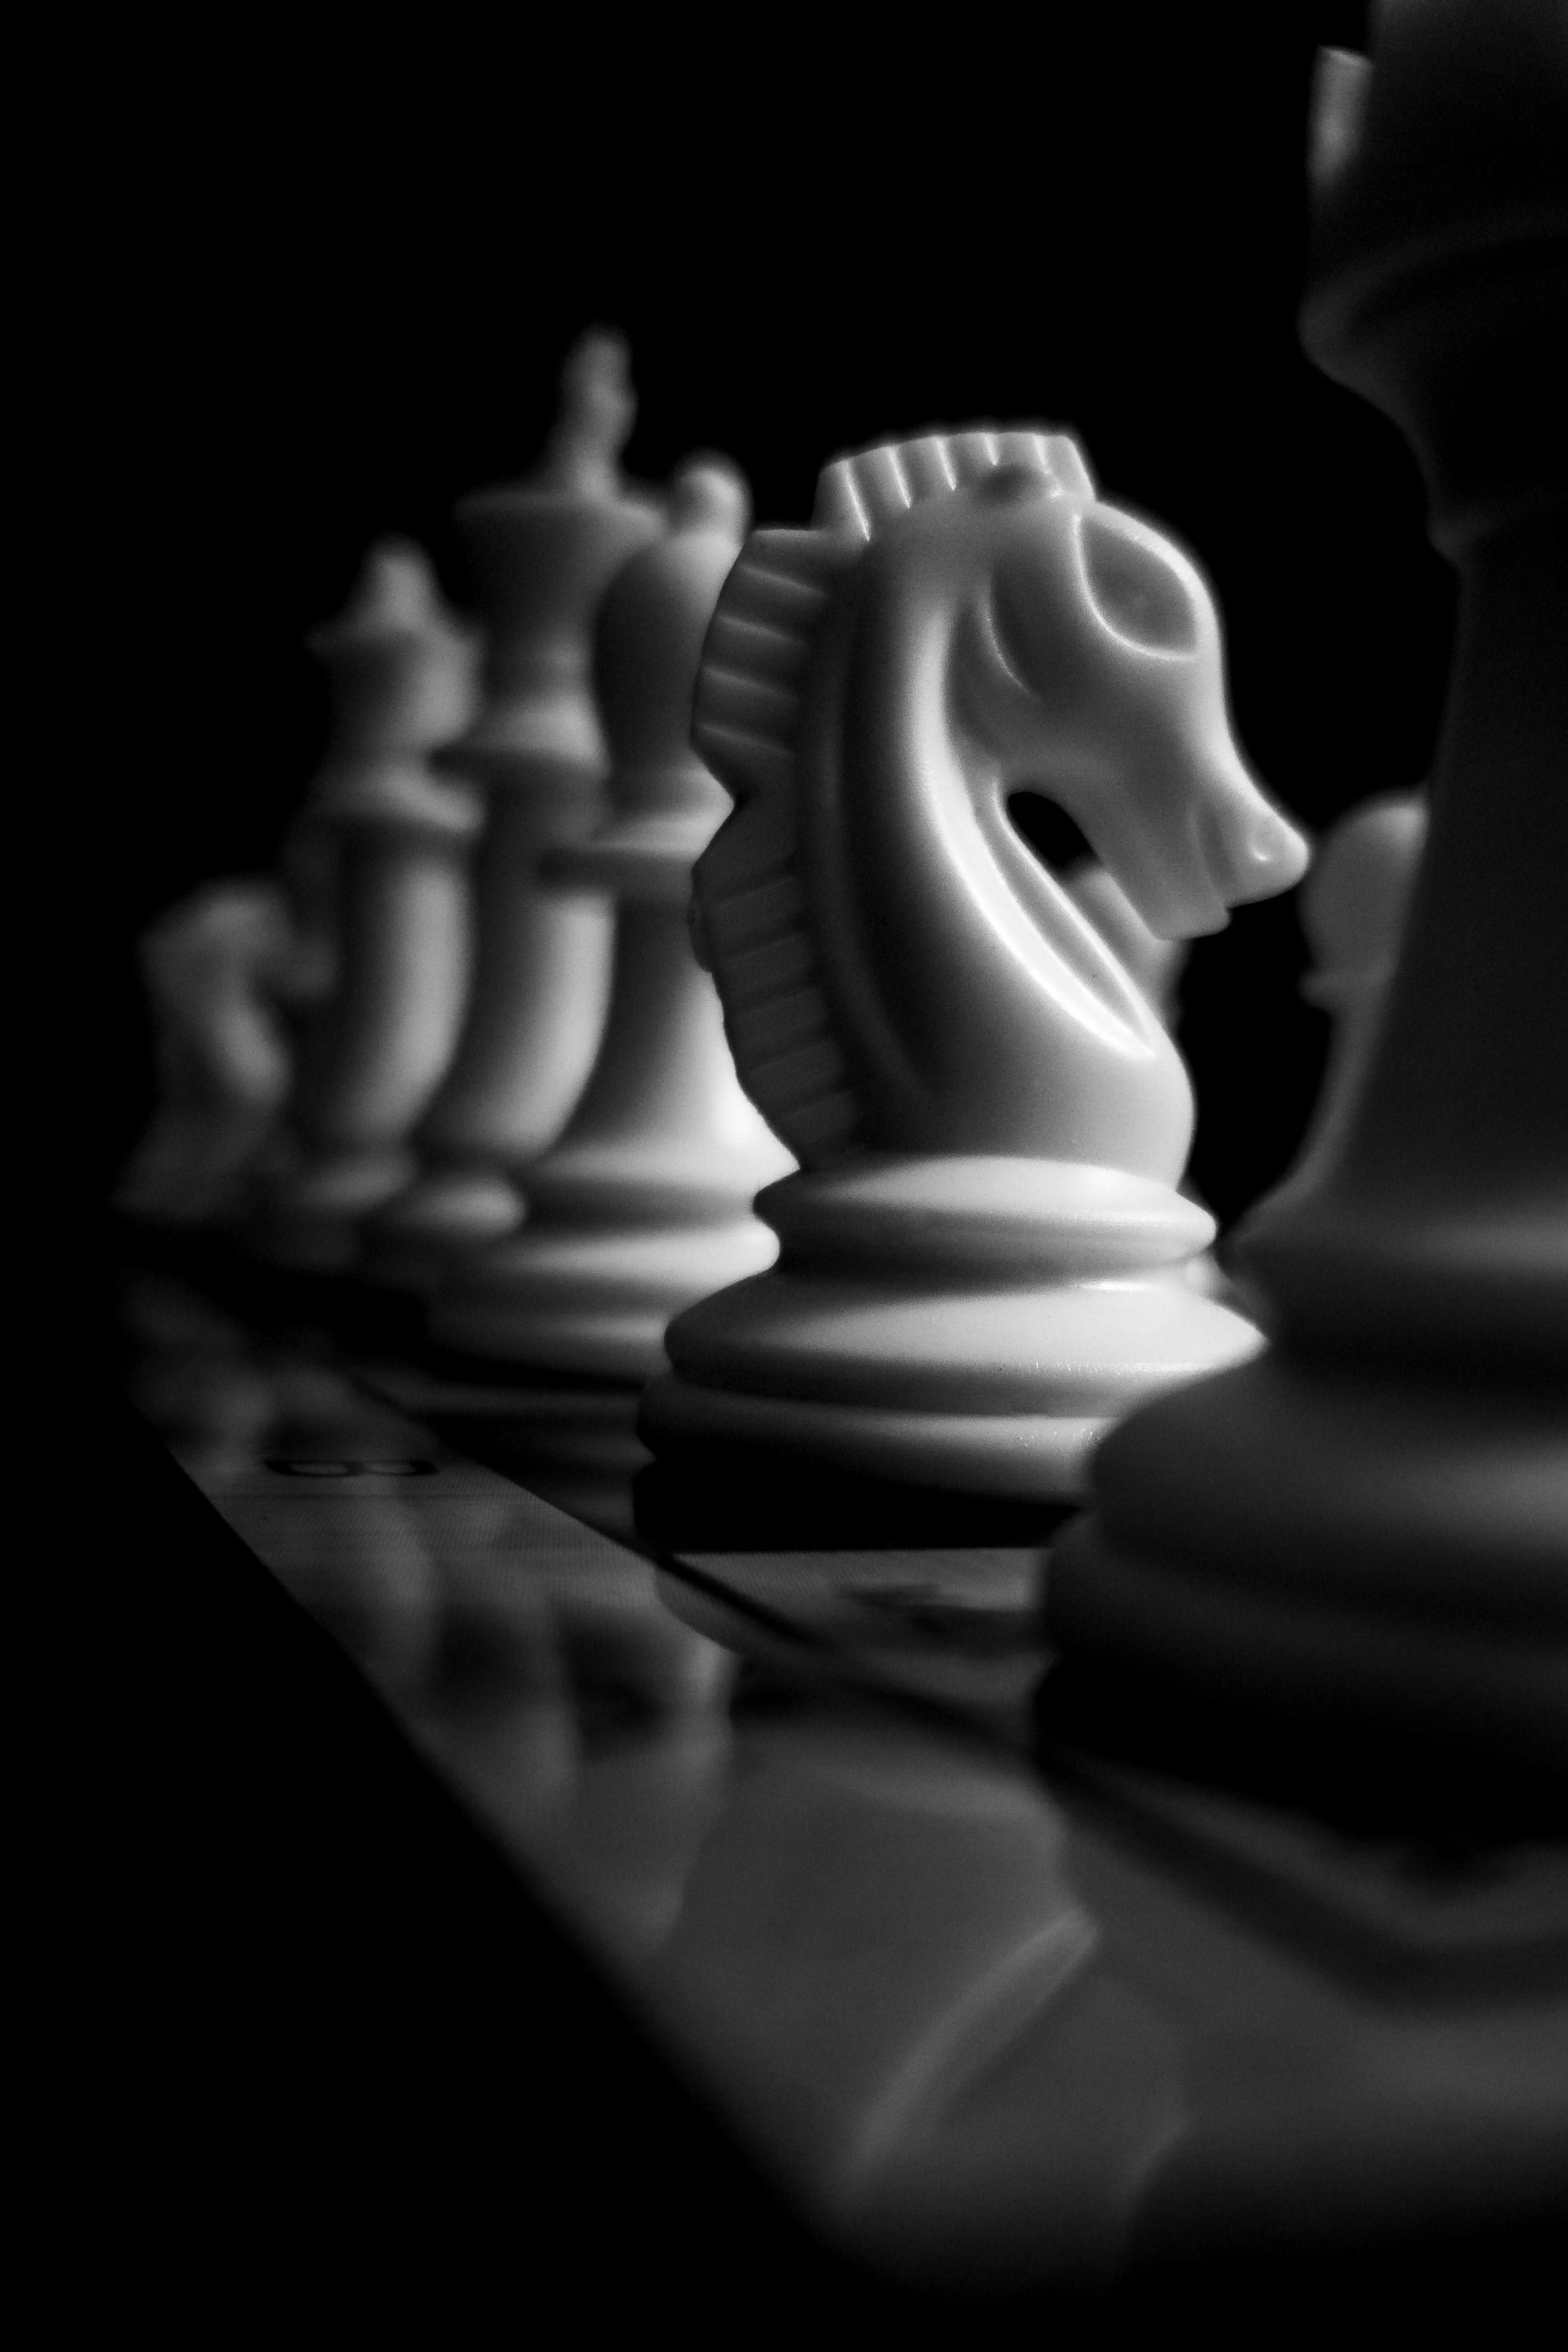 Chess Poster Stock Photos, Images and Backgrounds for Free Download